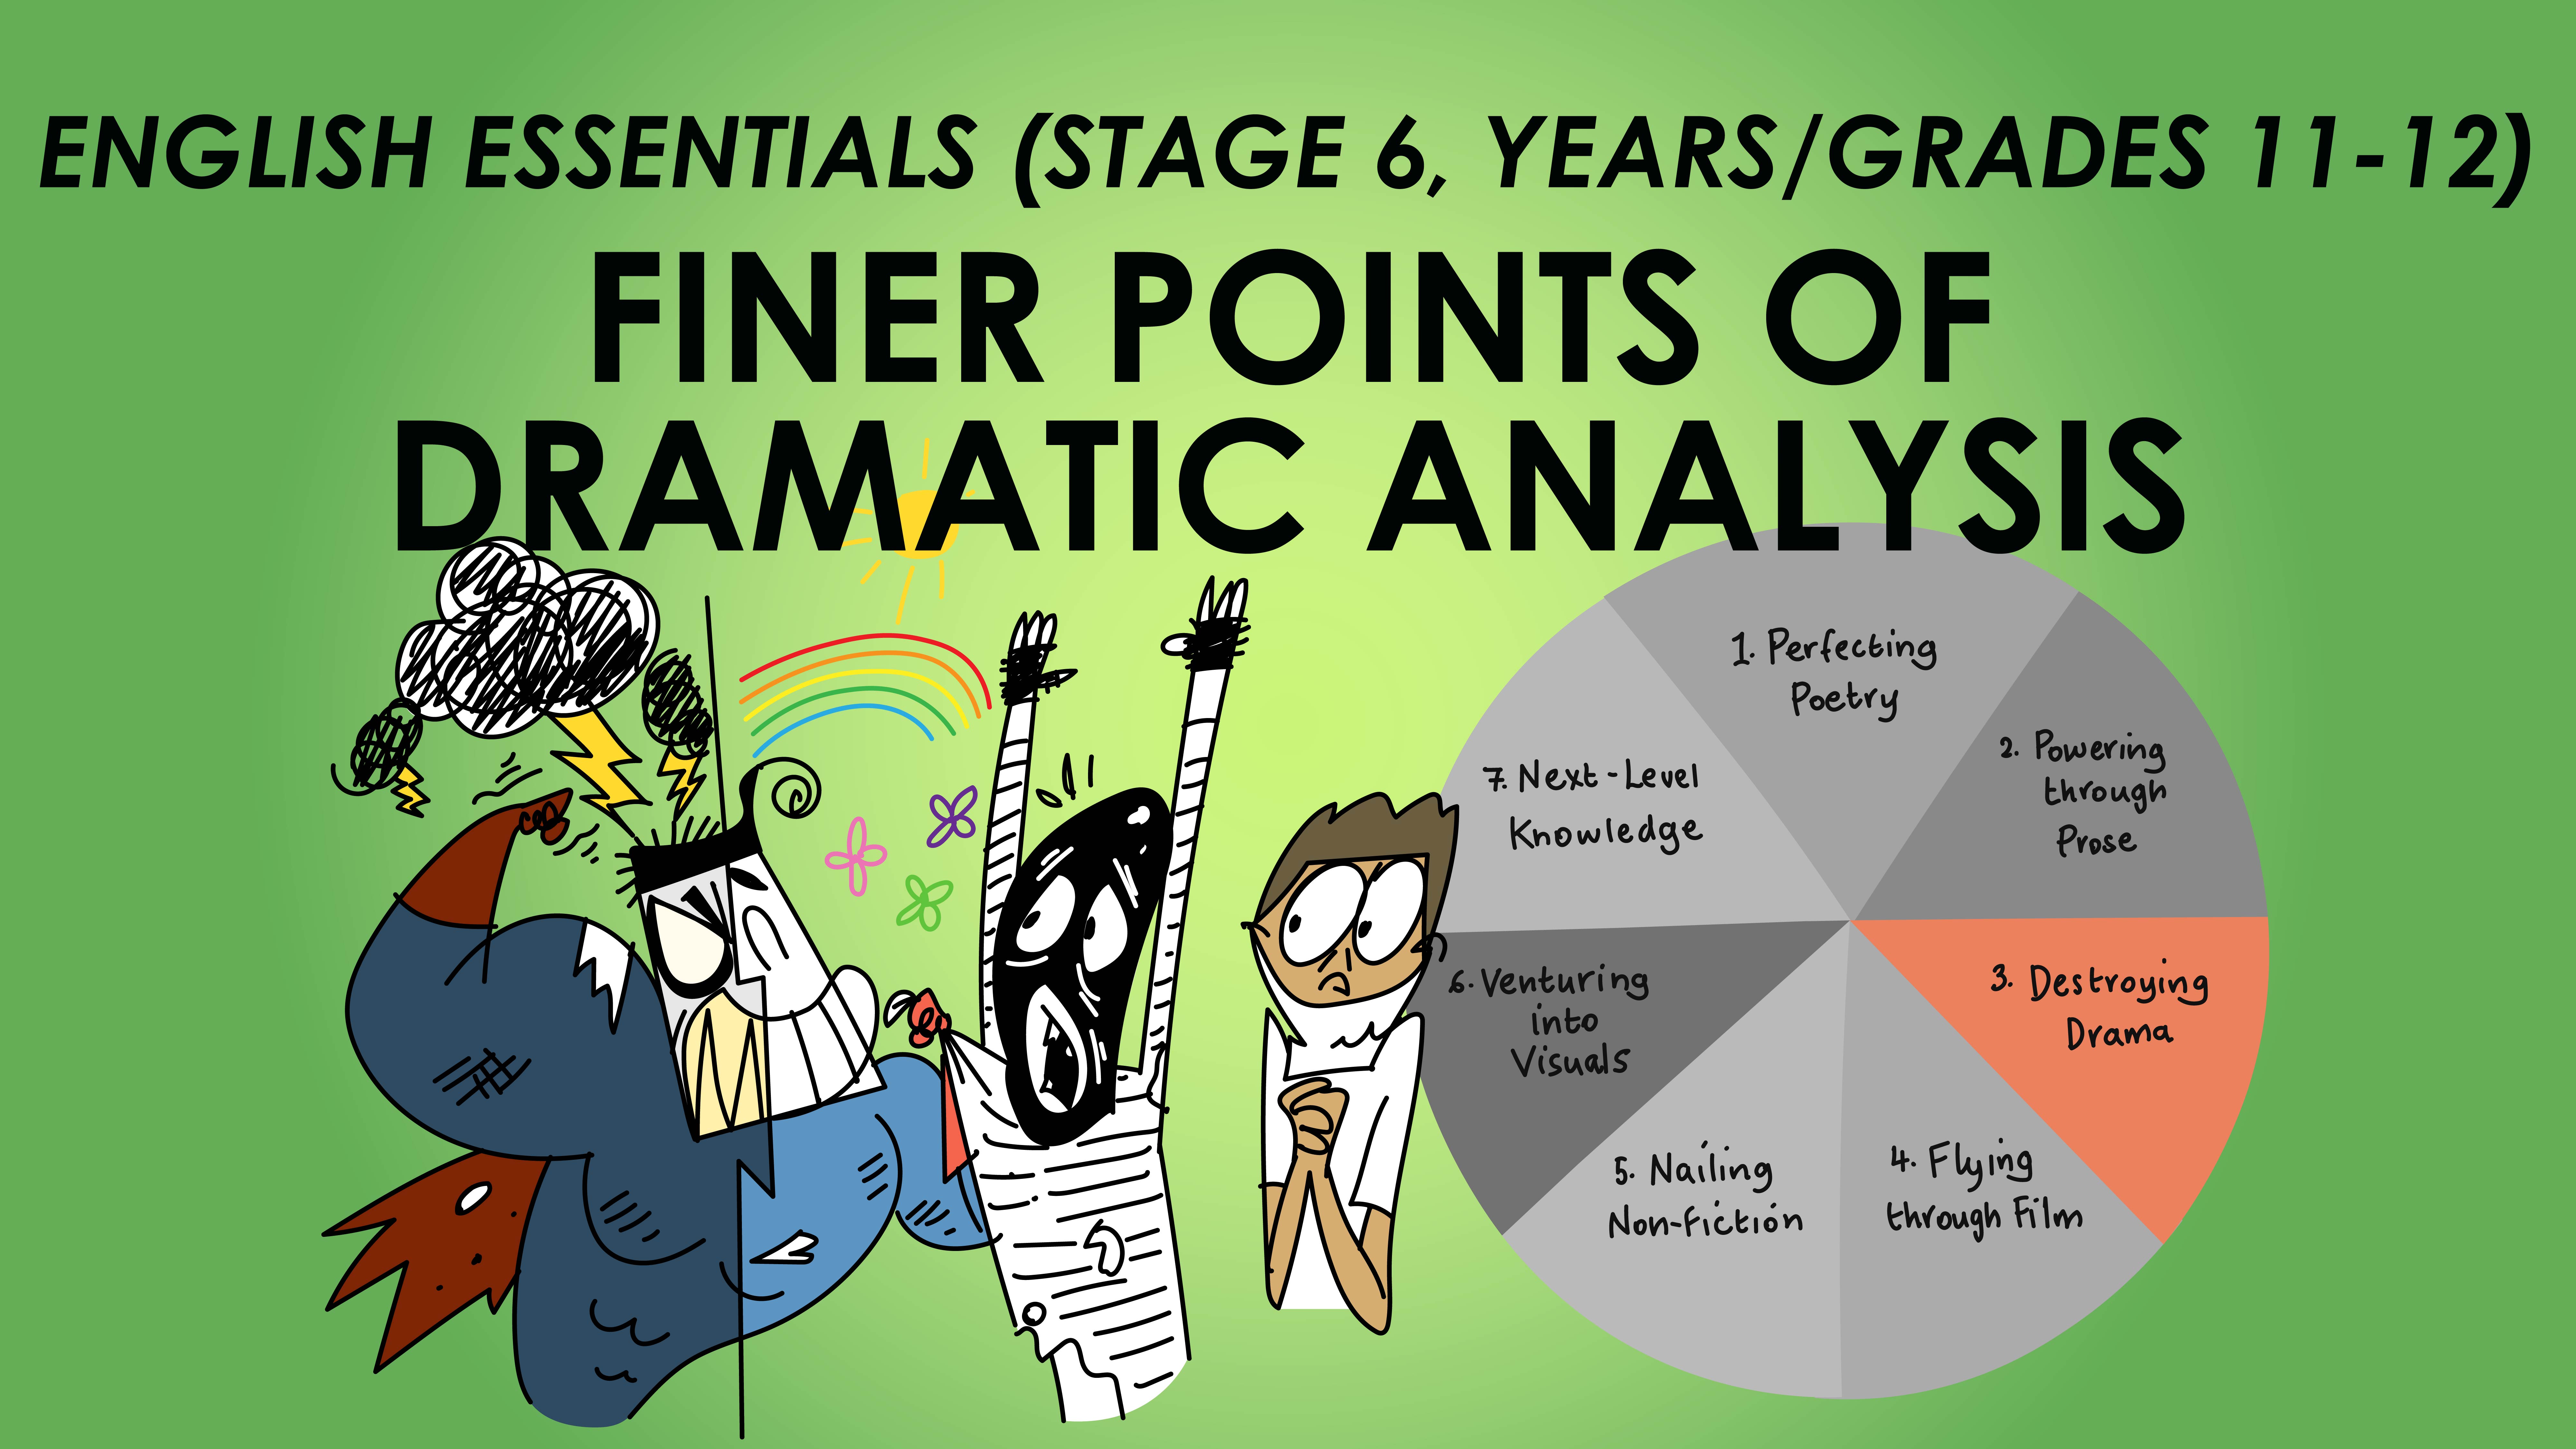 English Essentials - Destroying Drama – Finer Points of Dramatic Analysis (Stage 6, Years/Grades 11-12)